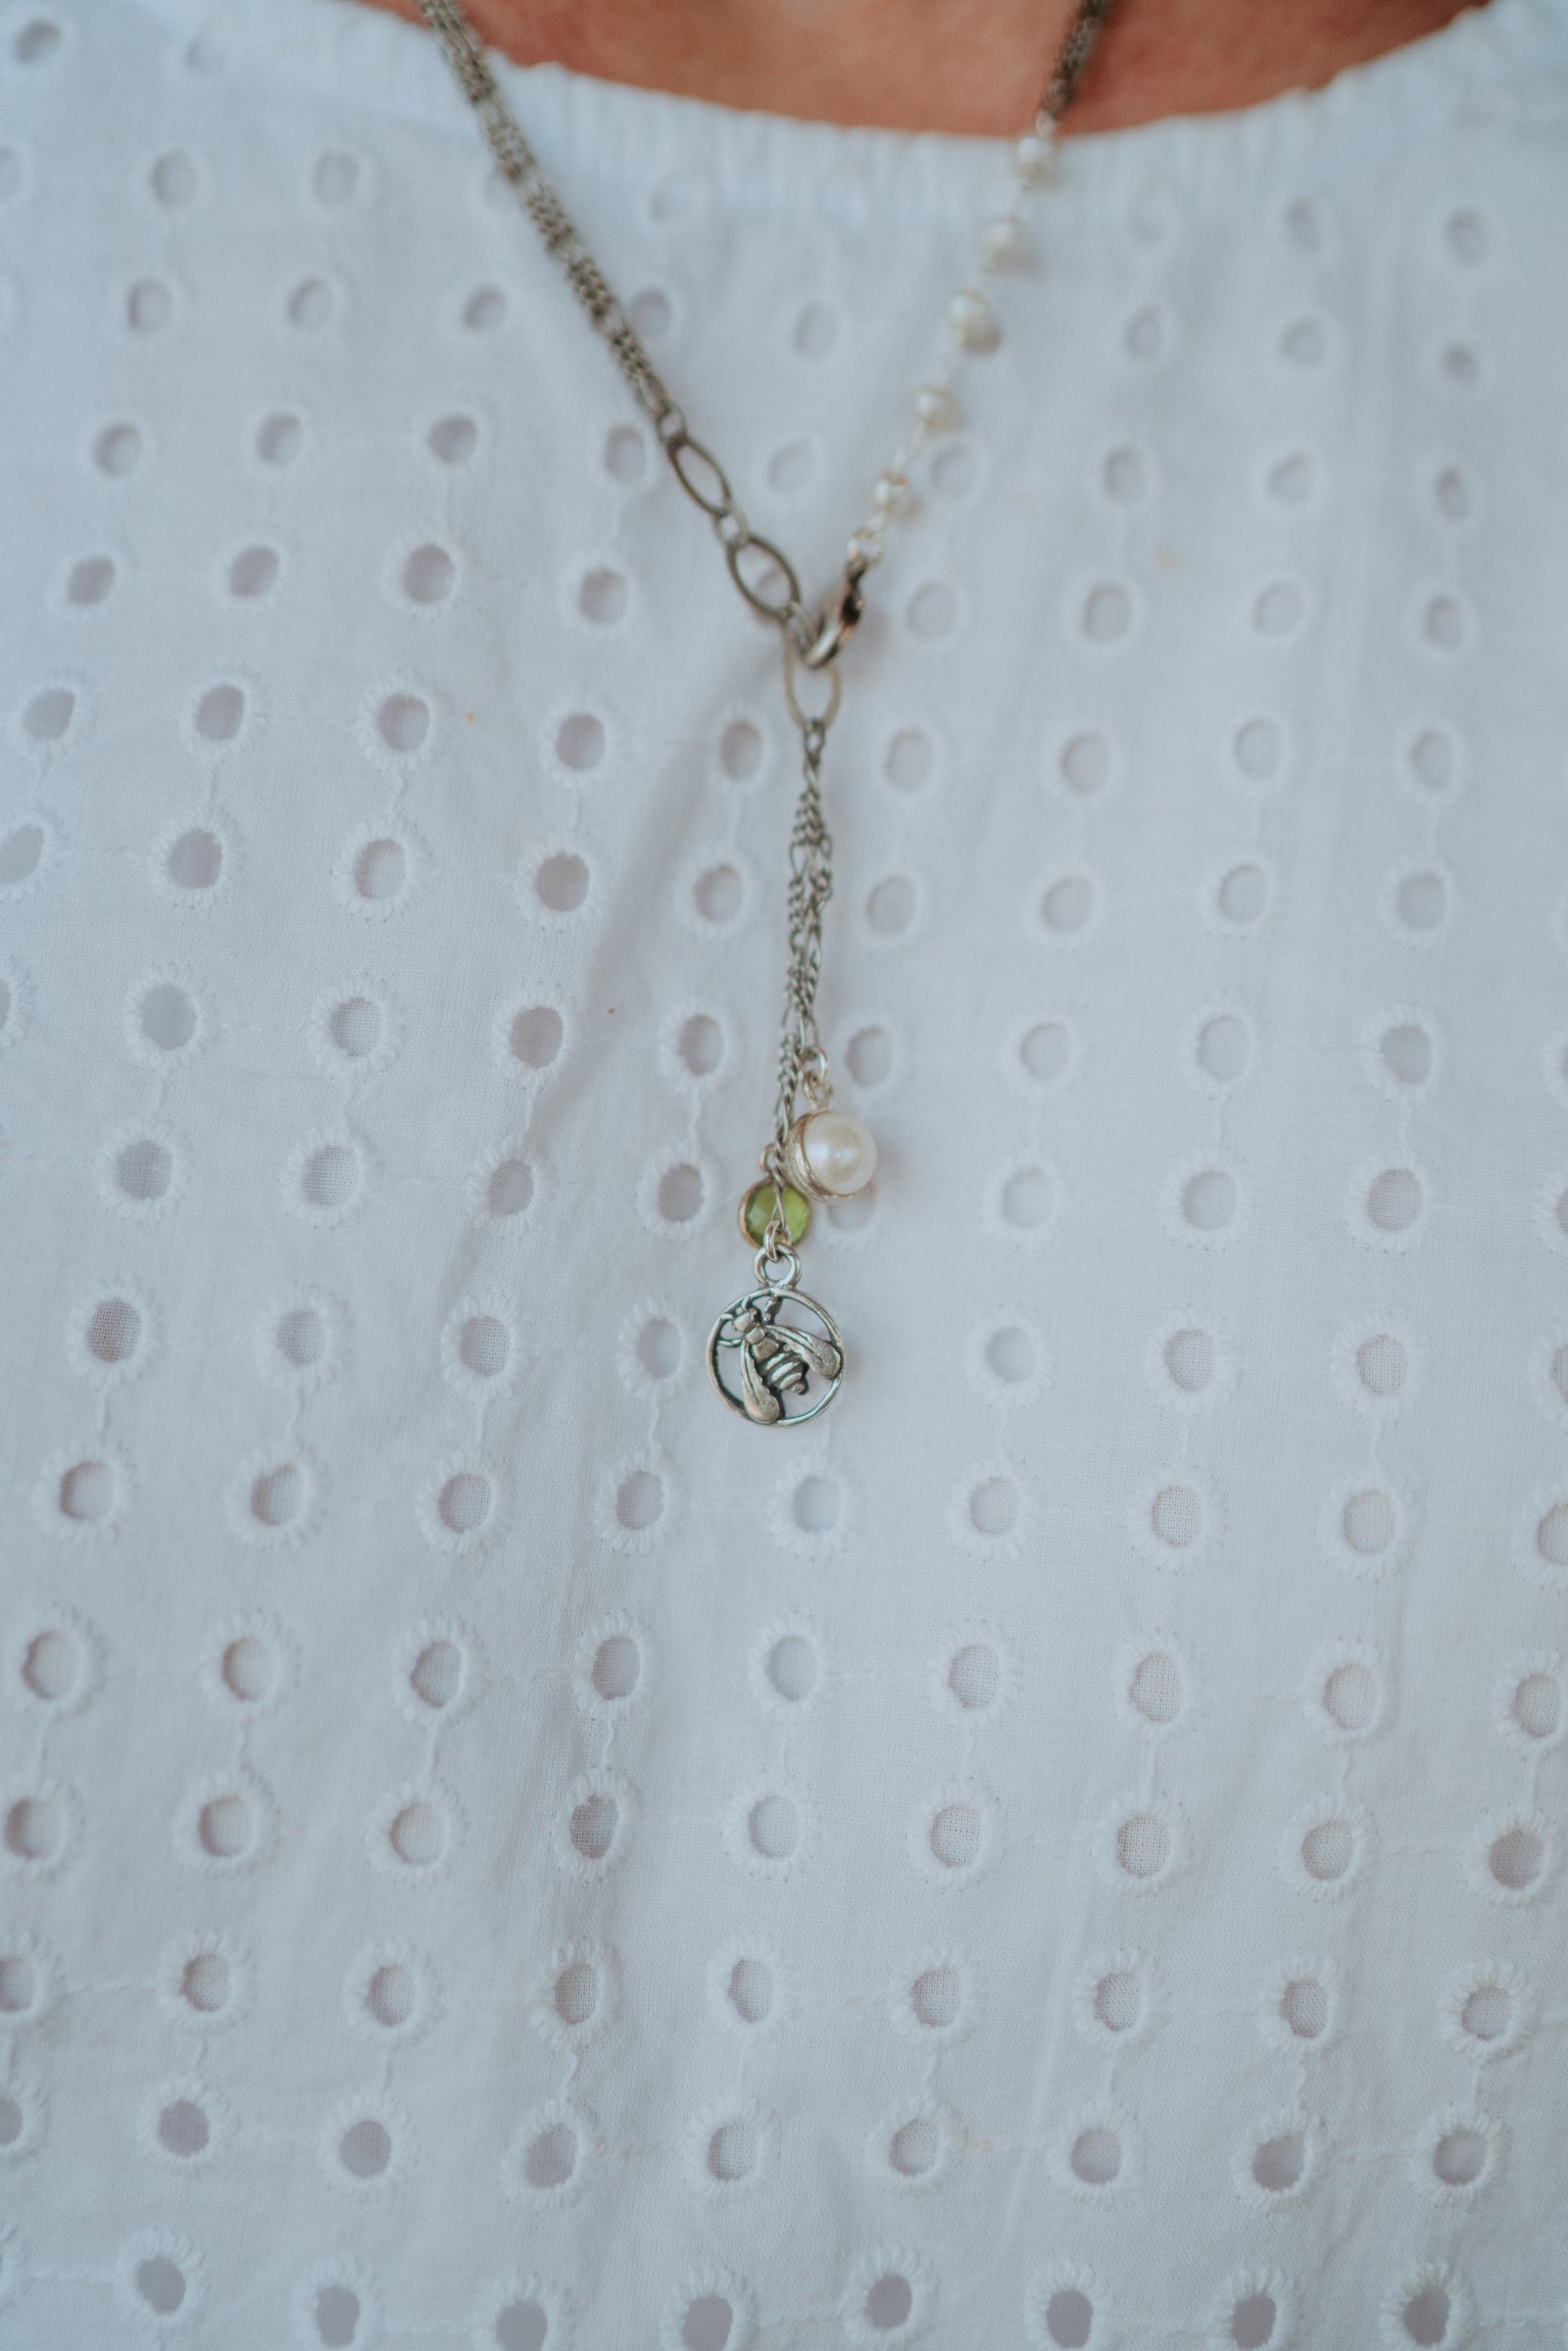 New Silver Bee Necklace #2